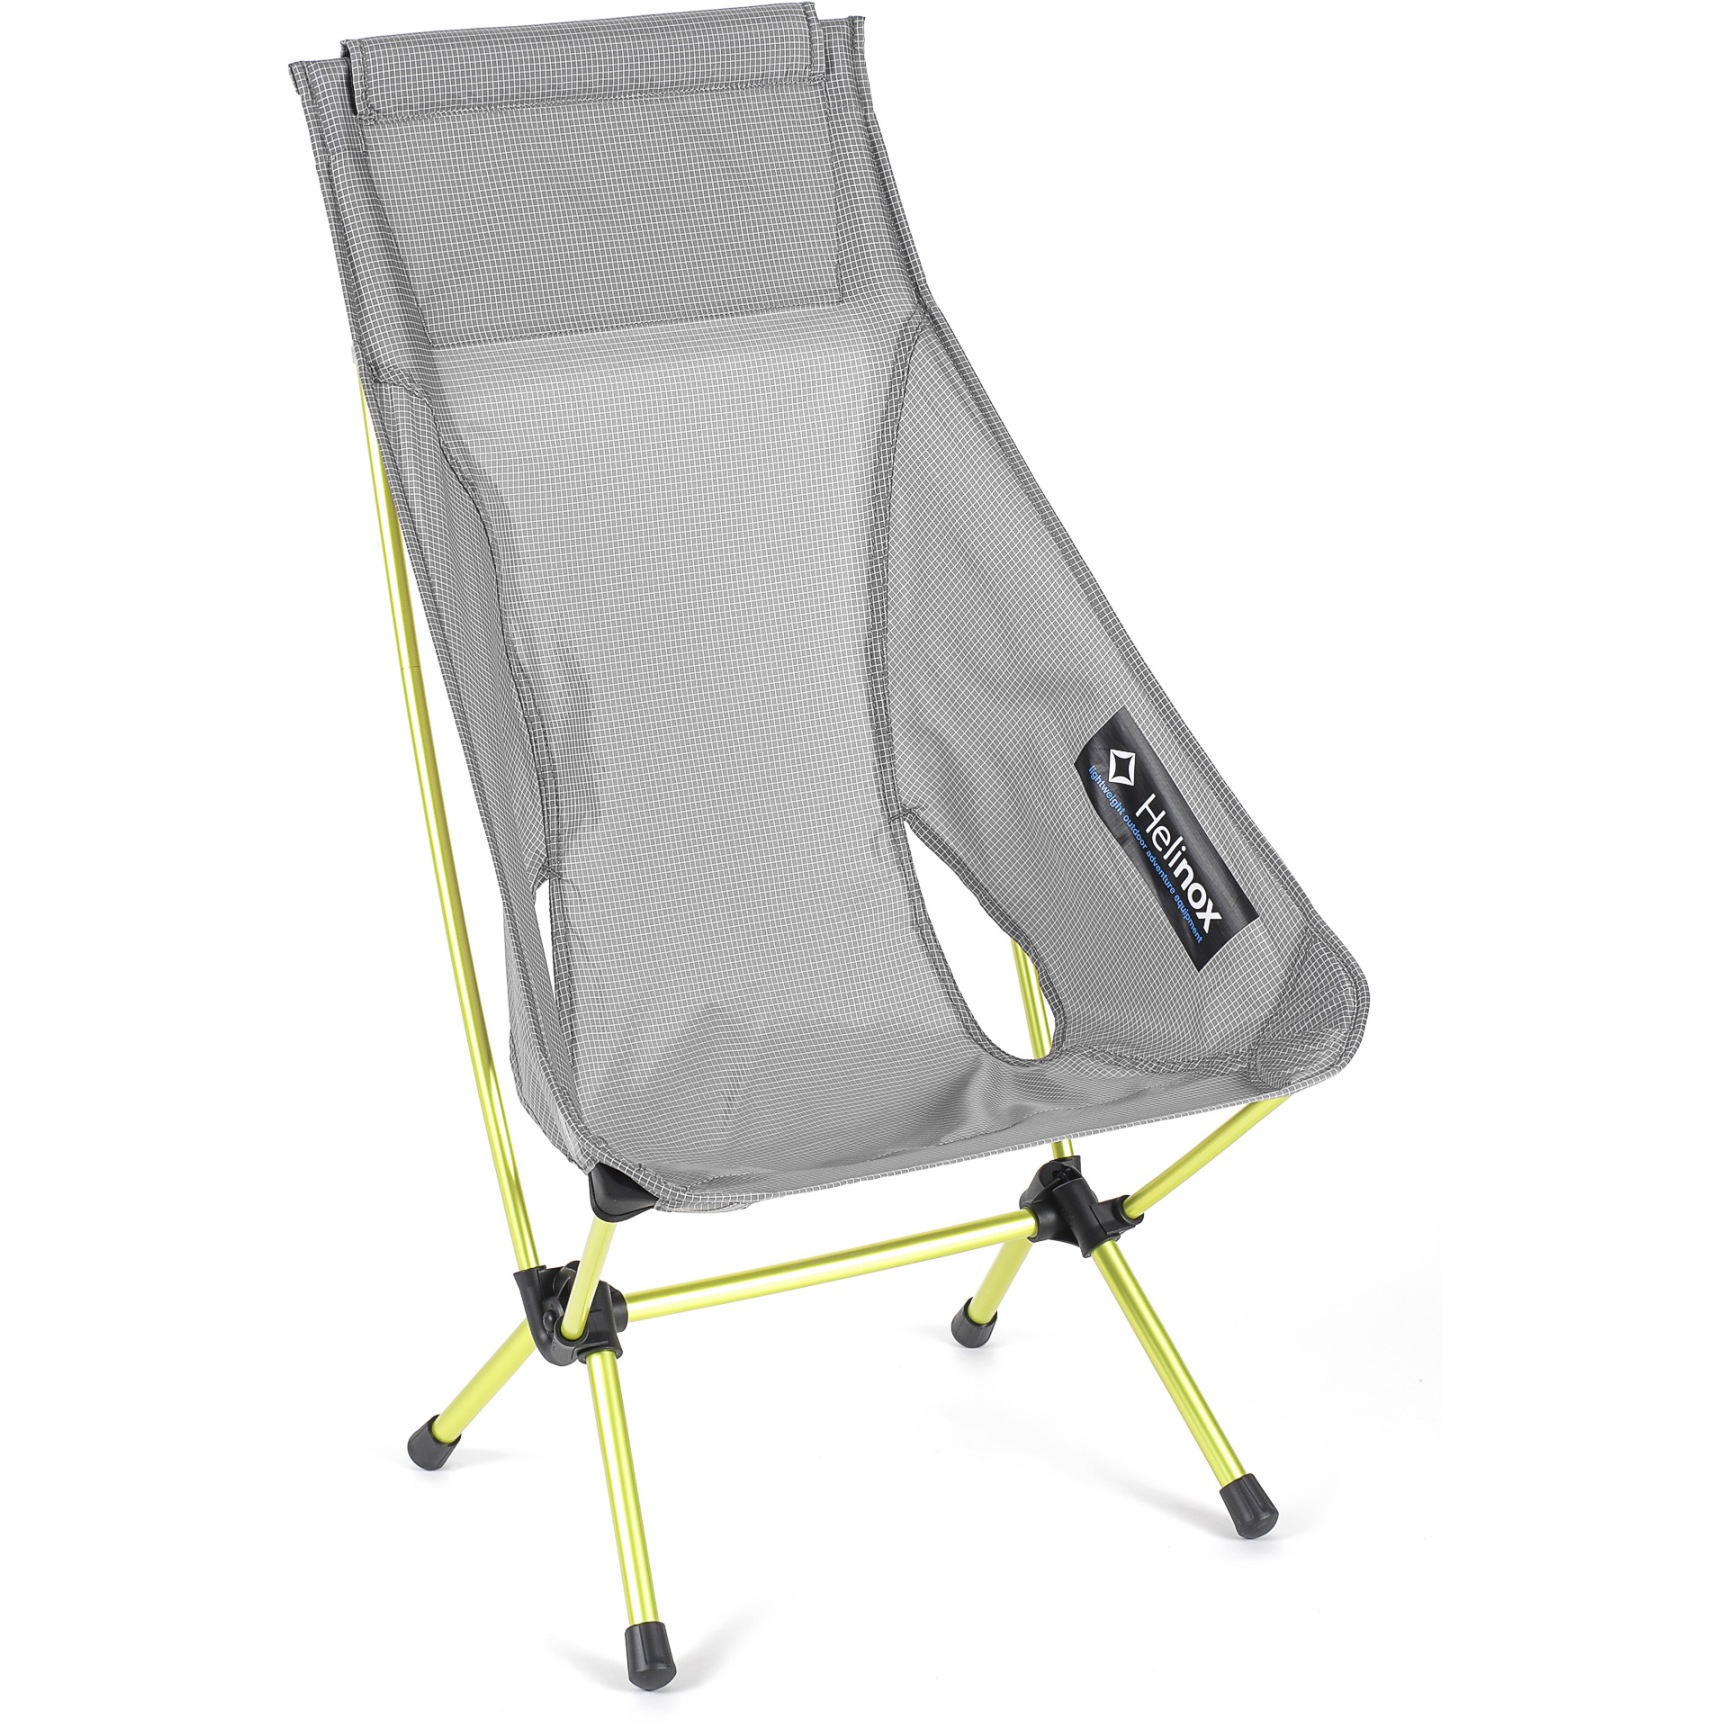 Image of Helinox Chair Zero High Back Camping Chair - grey - melon